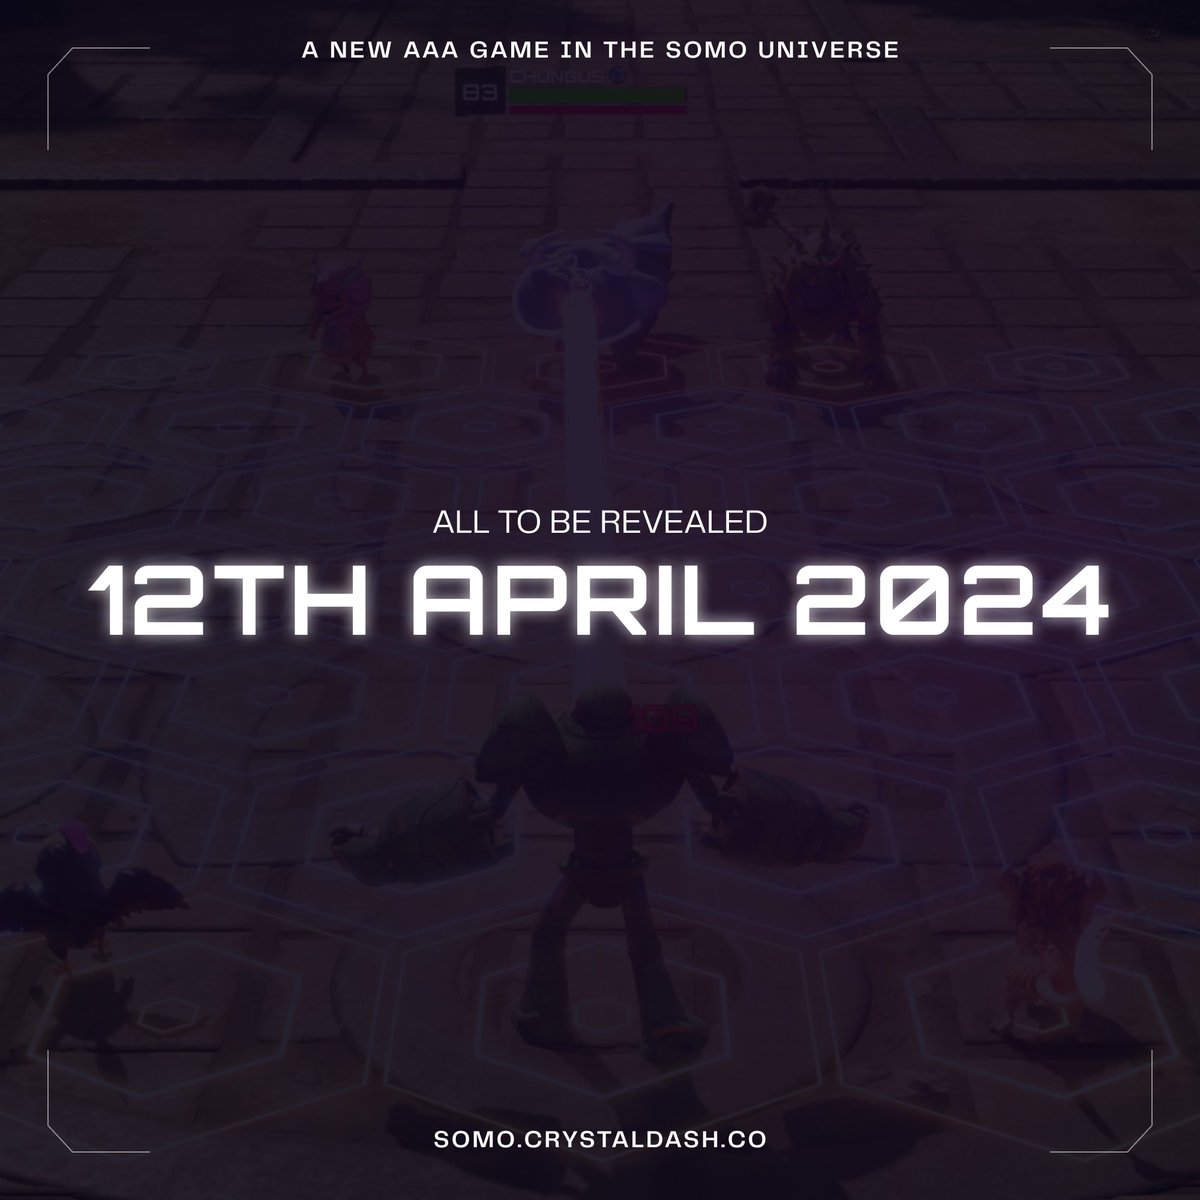 SOMO game site. Revealing tomorrow. 12th April 2024. Stay tuned 👀